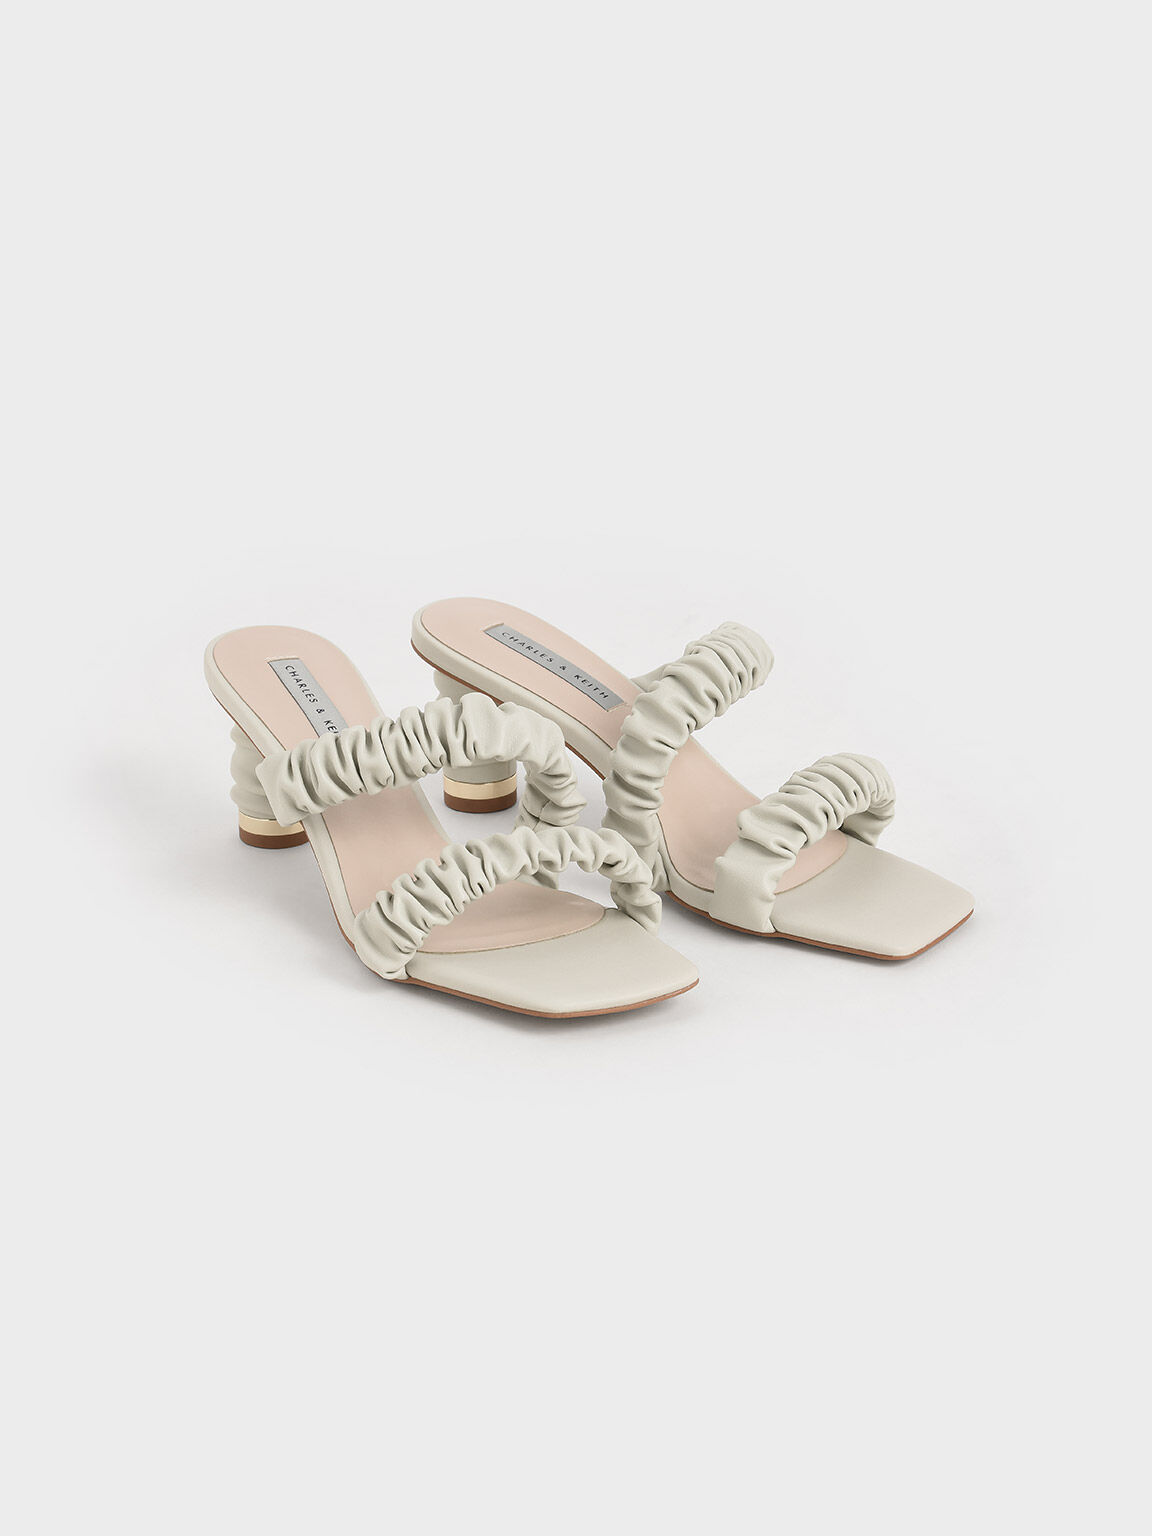 Ruched Strap Mules, White, hi-res